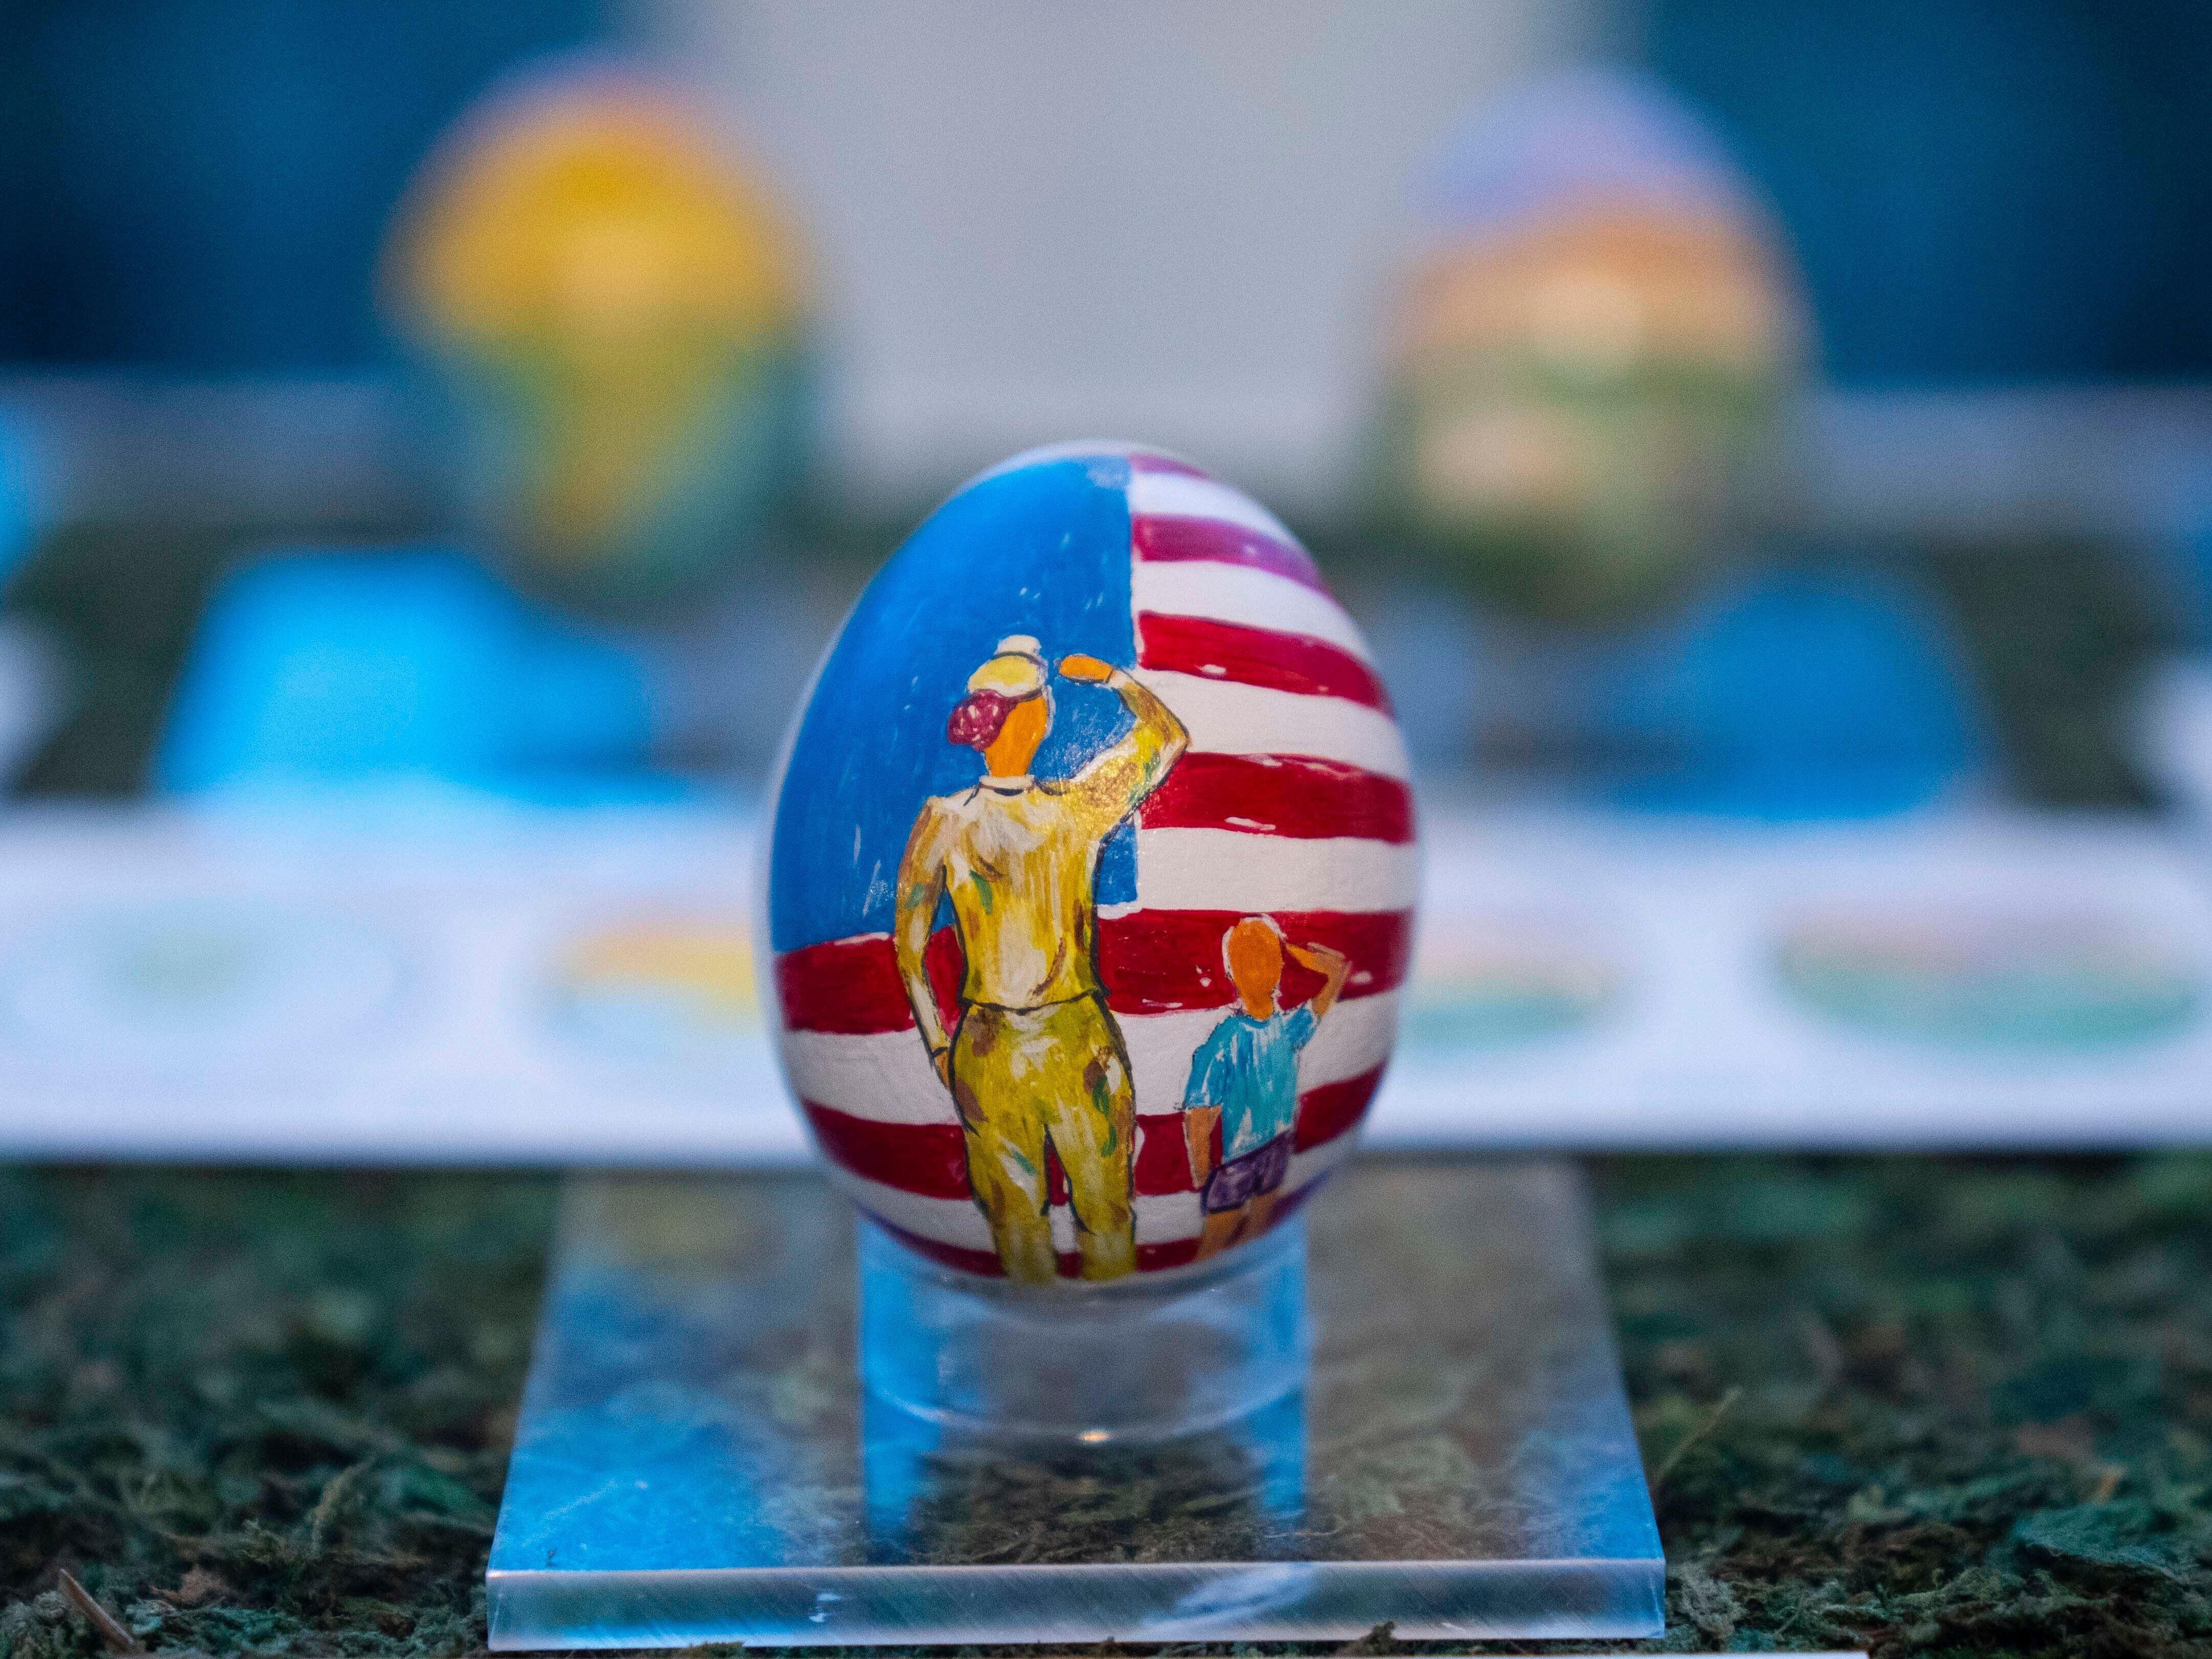 White House’s annual Easter egg roll to be attended by 40,000 people